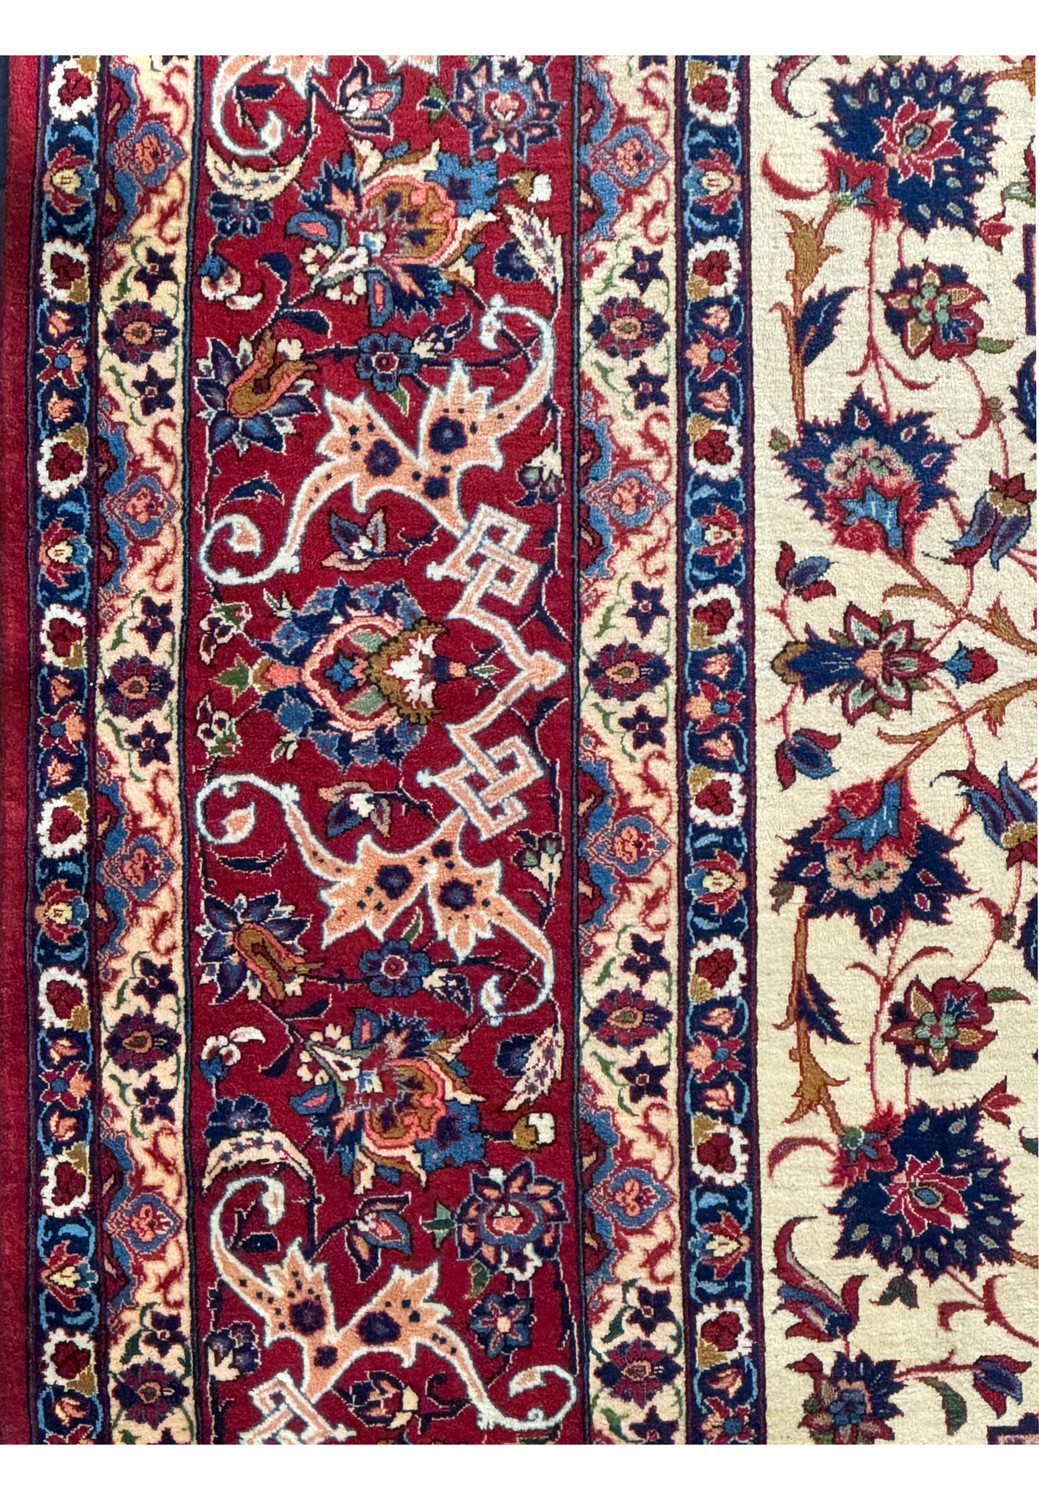 Detailed view of the rug's elaborate border of the Persian Isfahan rug with floral and geometric patterns on a red background.